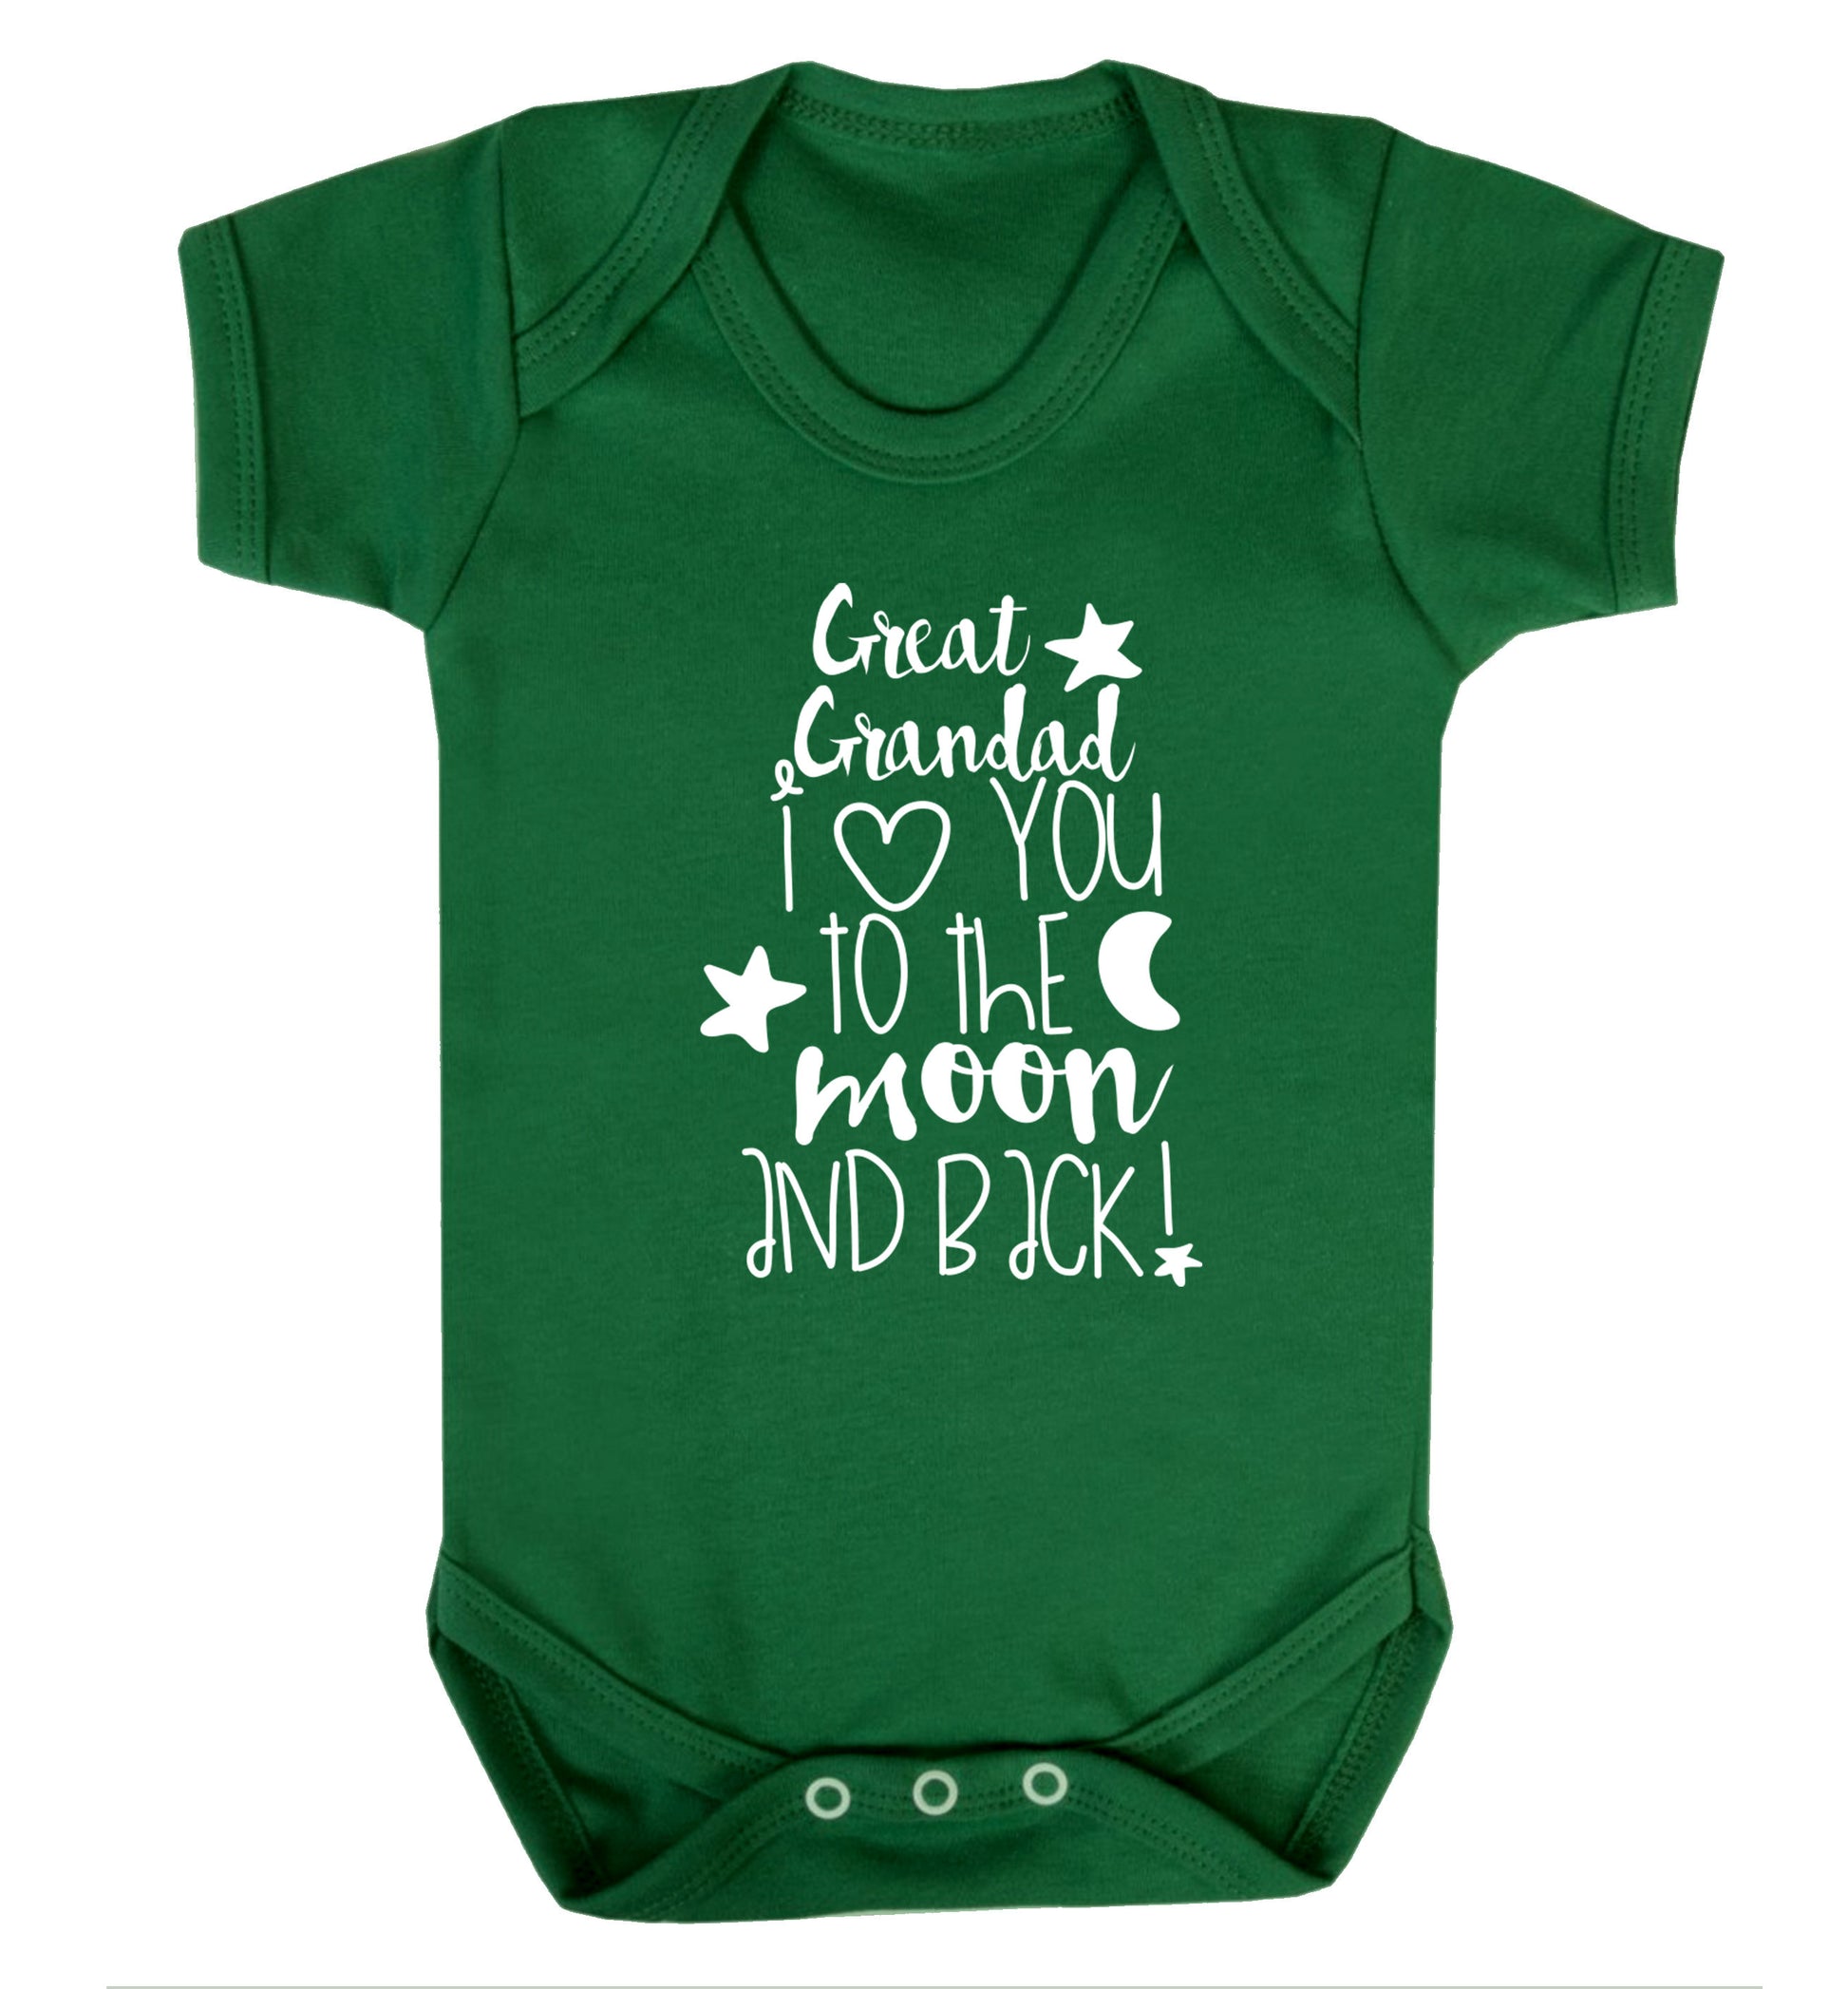 Great Grandad I love you to the moon and back Baby Vest green 18-24 months